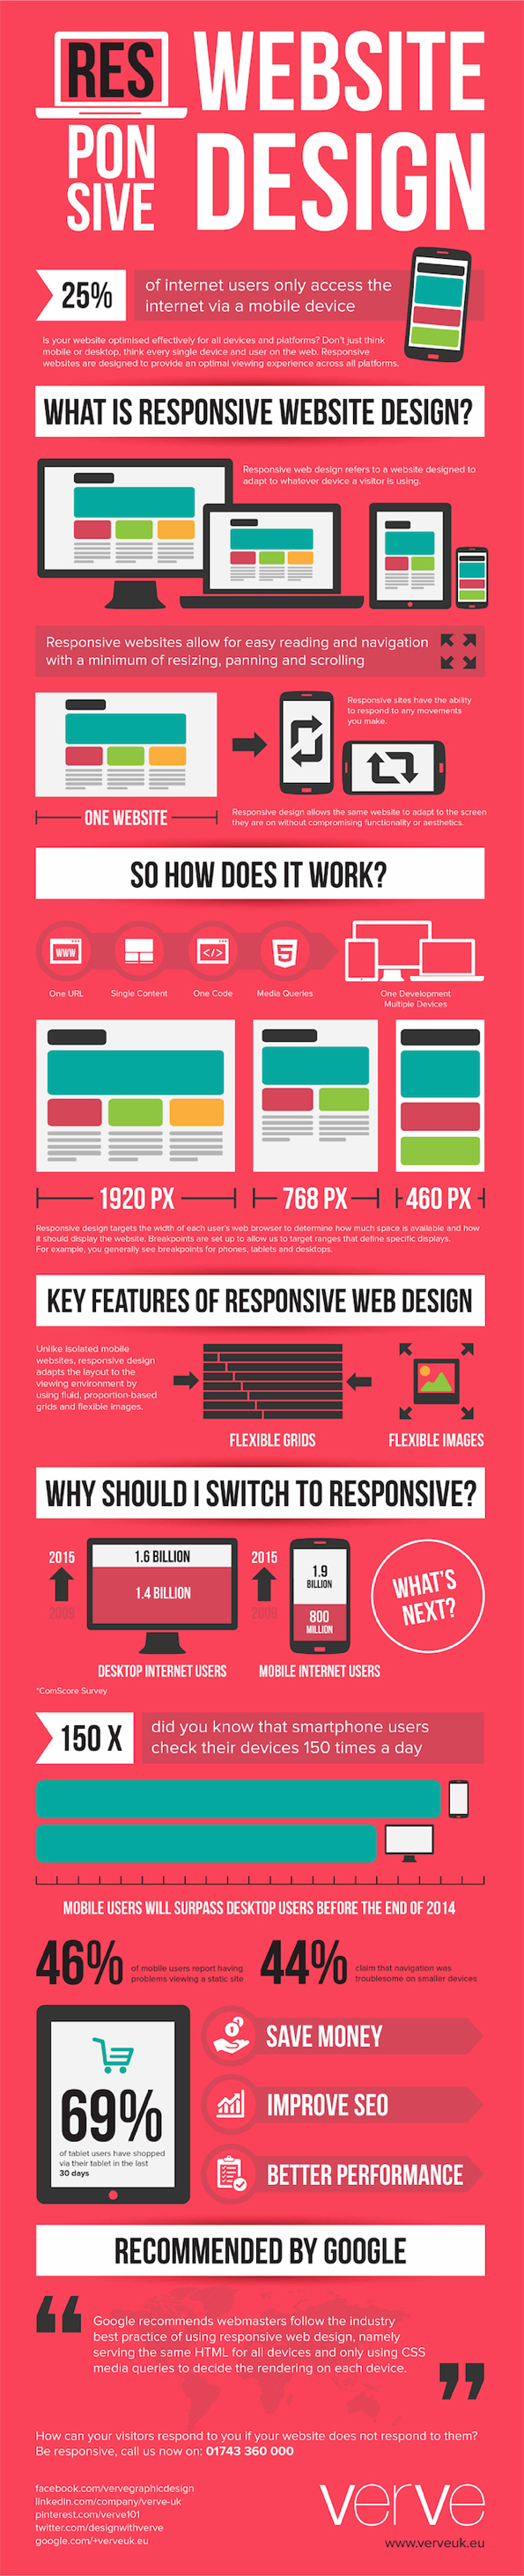 the-importance-of-responsive-website-design-infographic_copy